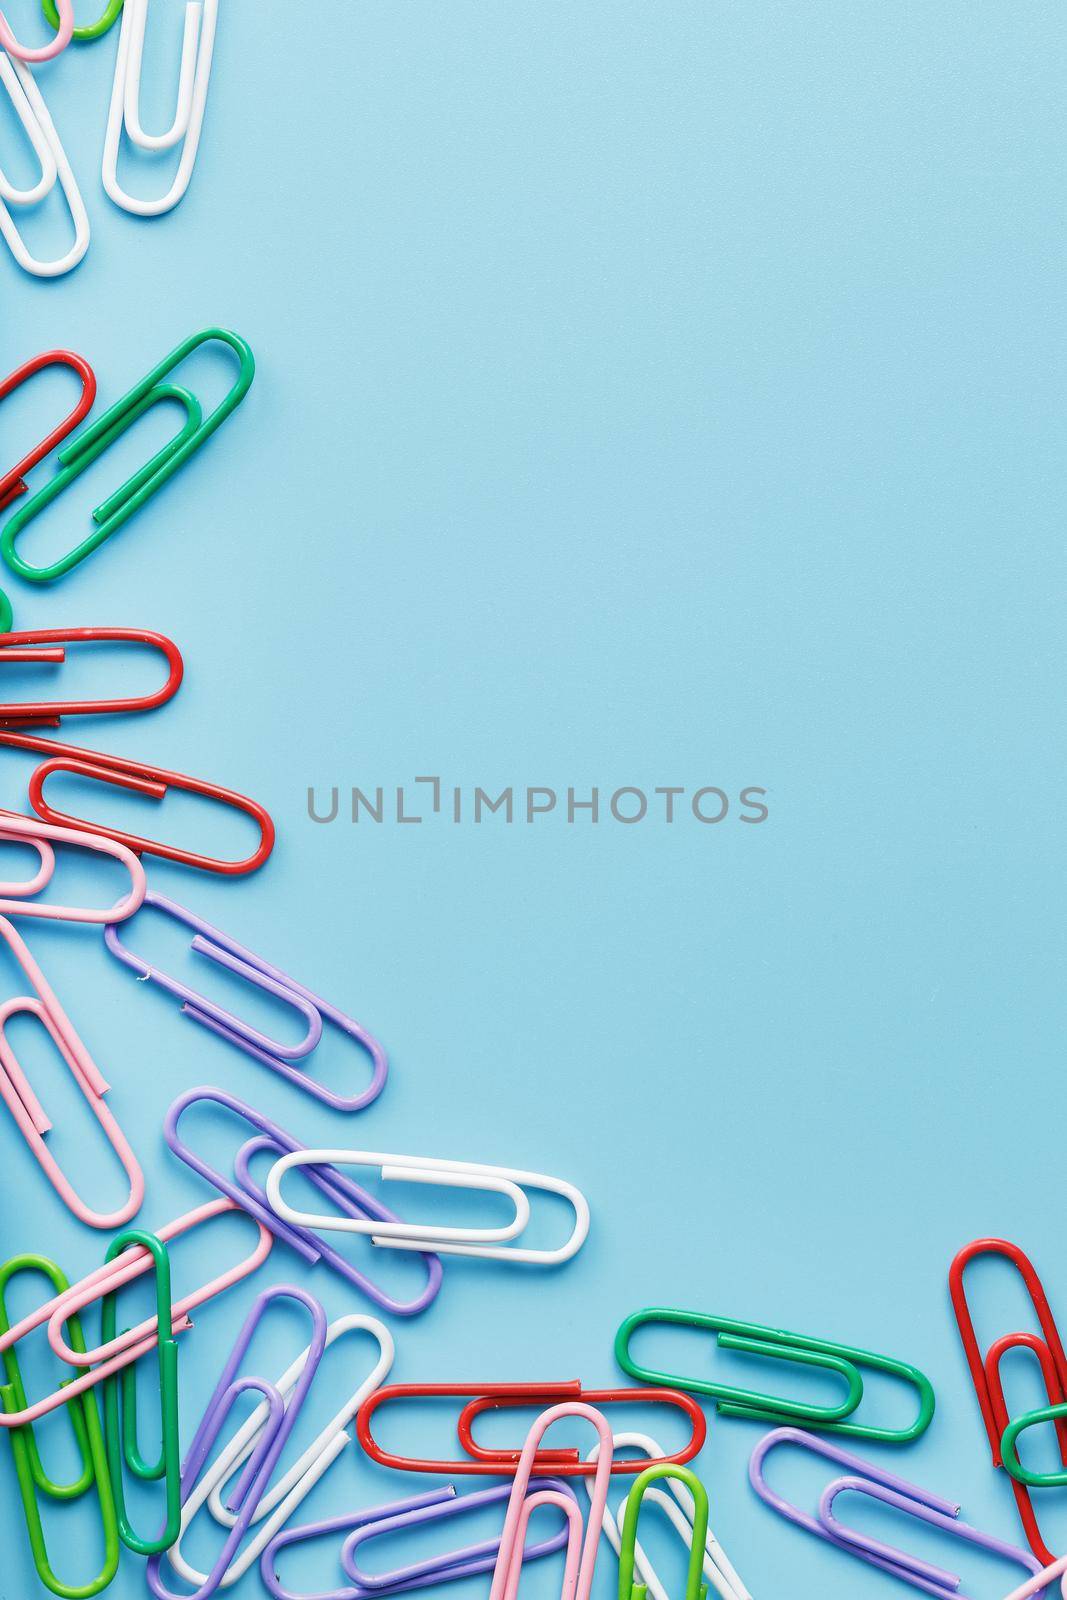 Multicolored paper clips on a blue background. Free space